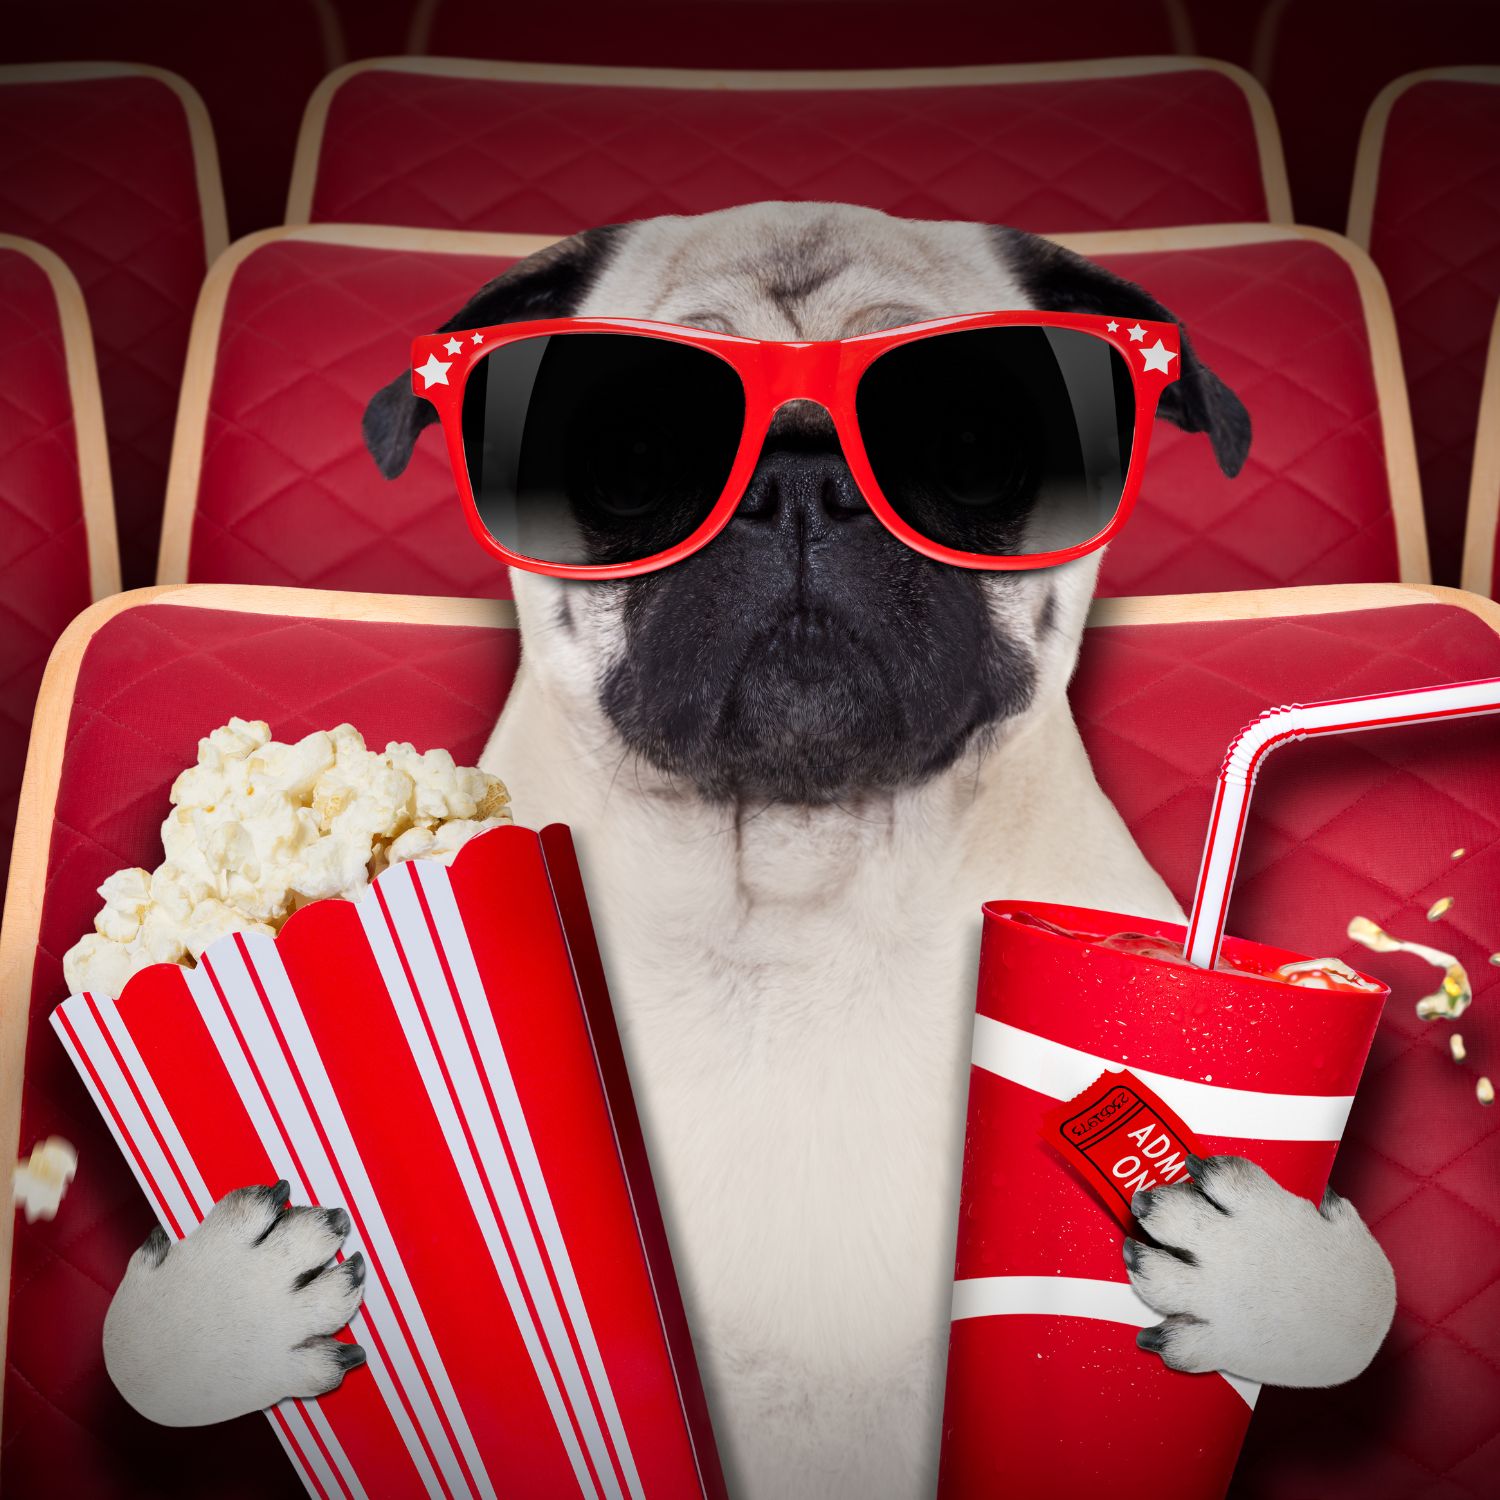 Movie Day at the Seaboard Centre